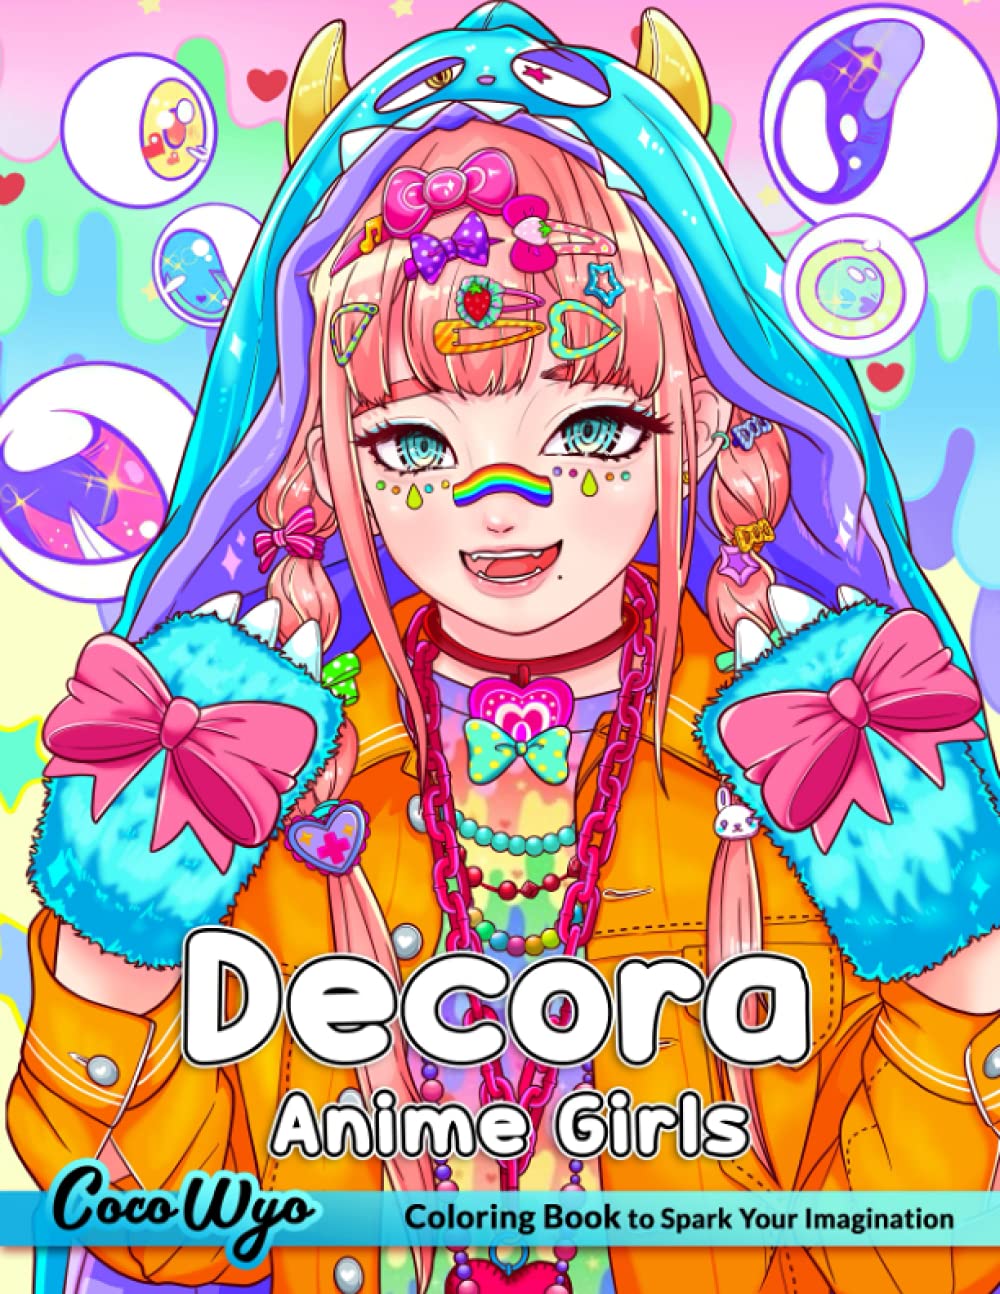 Anime Coloring Books That Will Rock Your World | Creatively Calm Studios